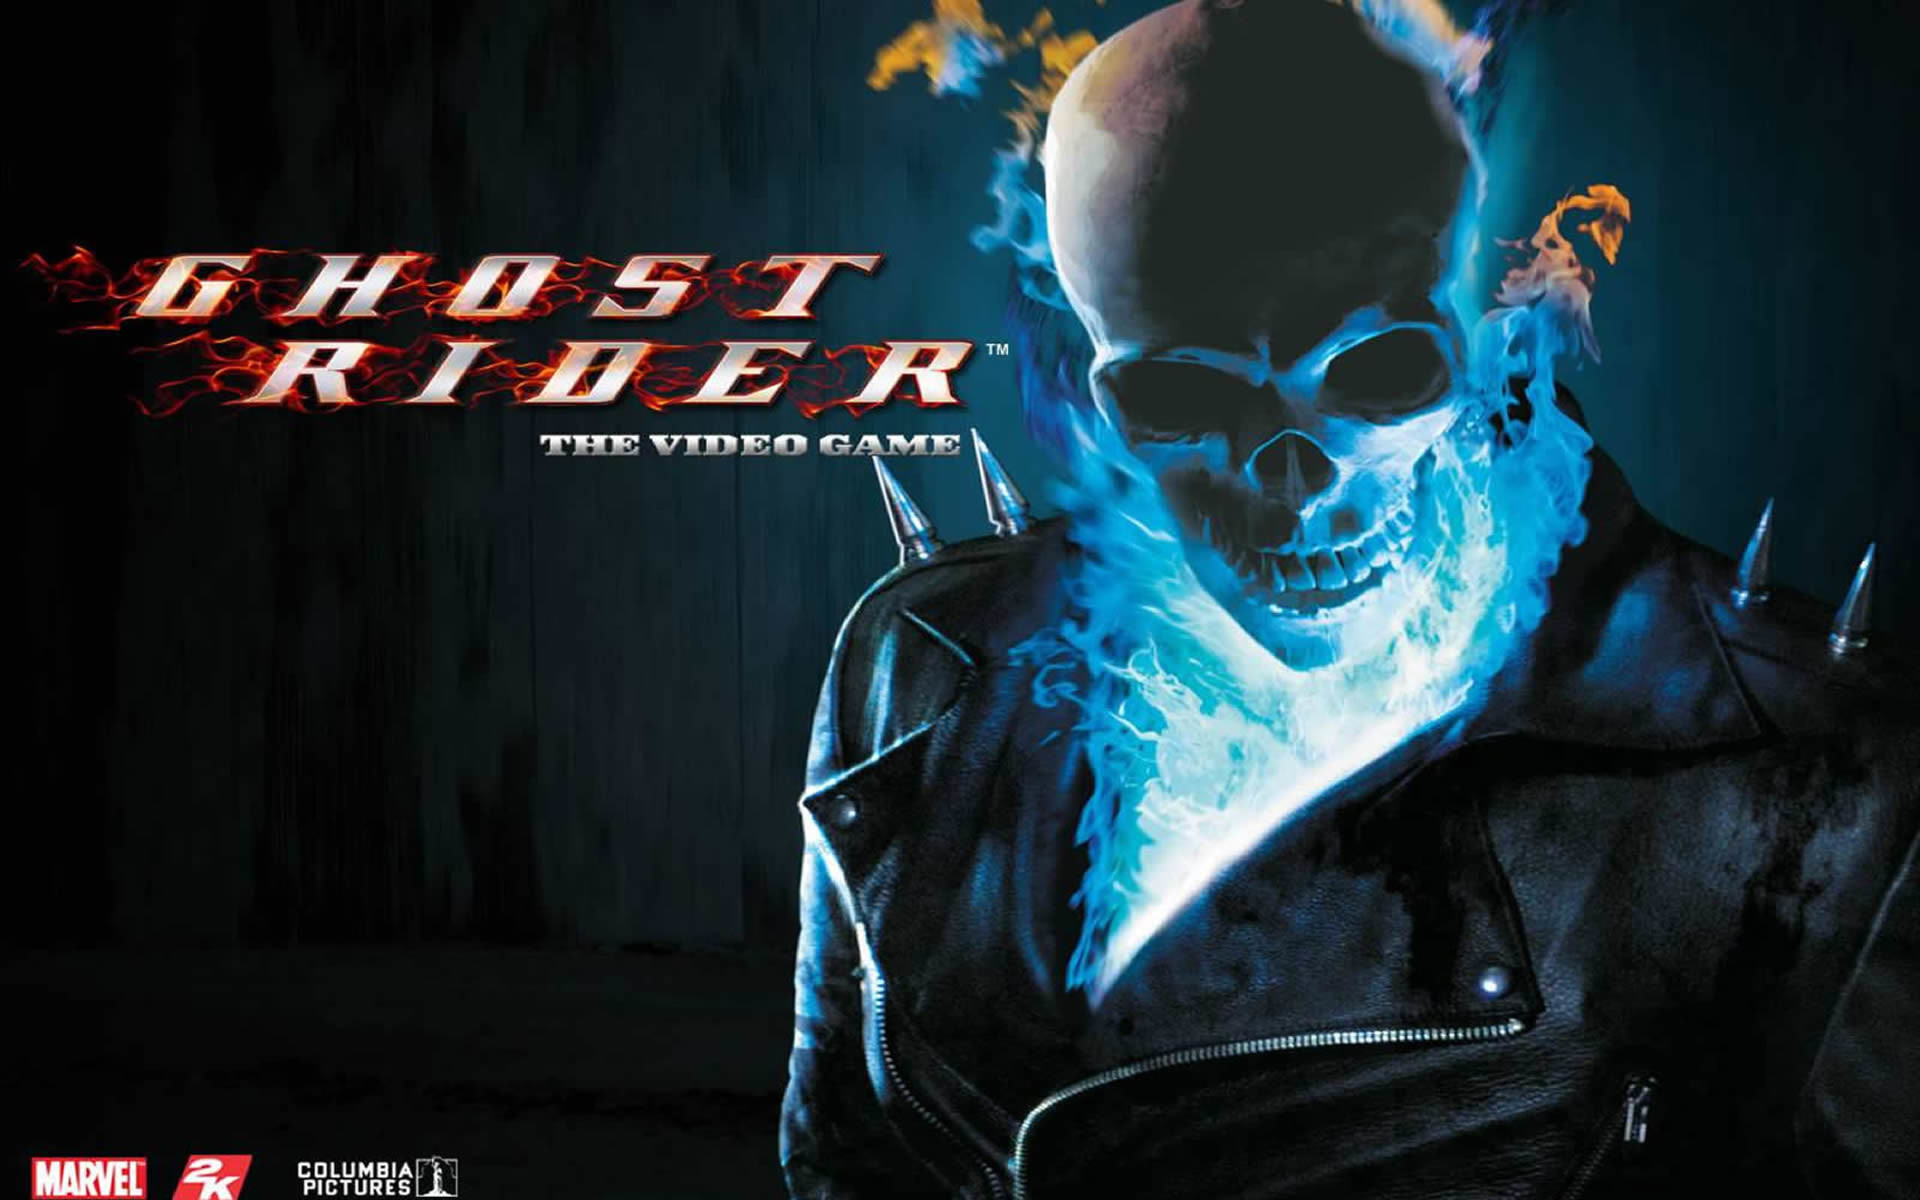 1920x1200 Blue Flame Skull Superhero Games Wallpaper Image featuring Ghost 